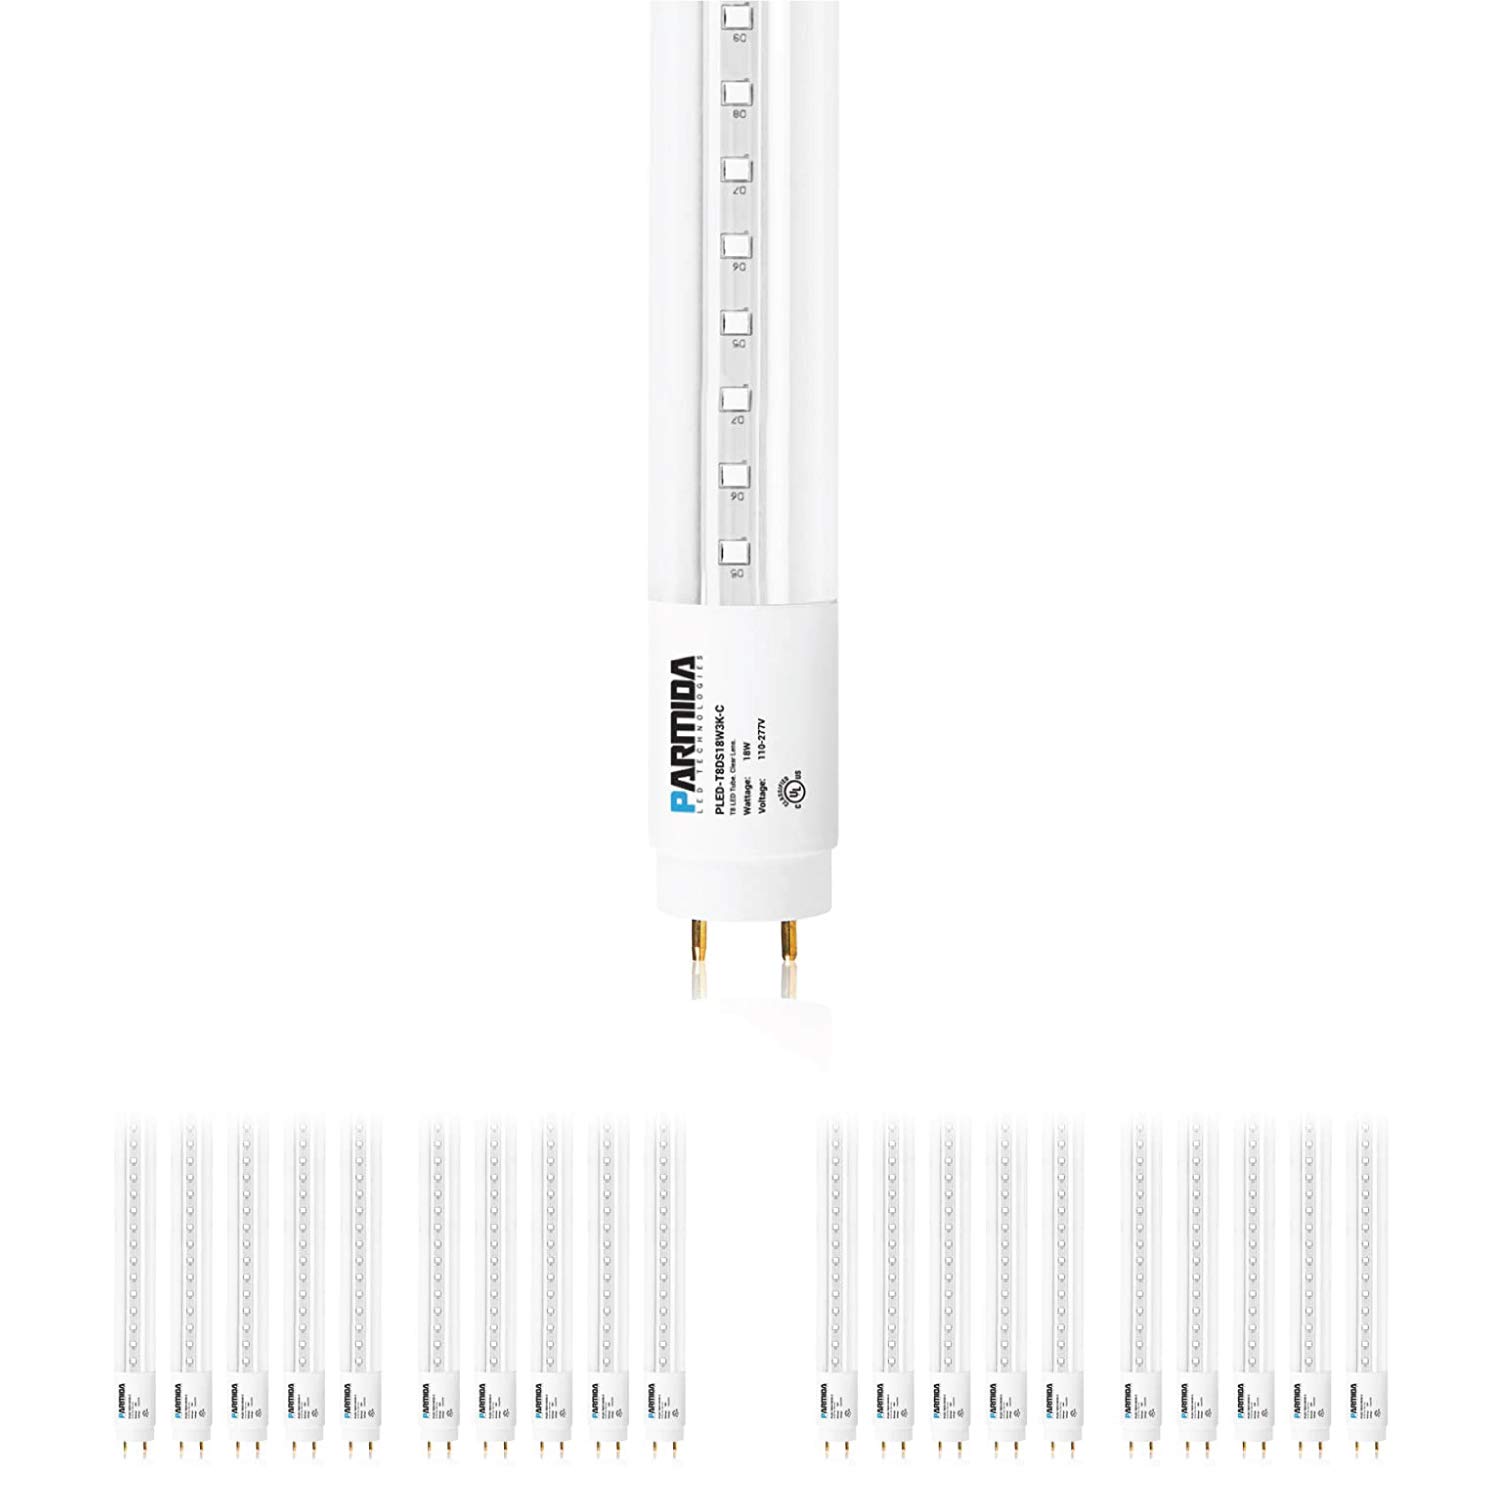 PARMIDA 20-Pack 4FT LED T8 Ballast Bypass Type B Light Tube, 18W, UL-Listed for Single-Ended & Dual-Ended Connection, 2200lm, Clear Lens, T8 T10 T12, UL, FCC - 4000K